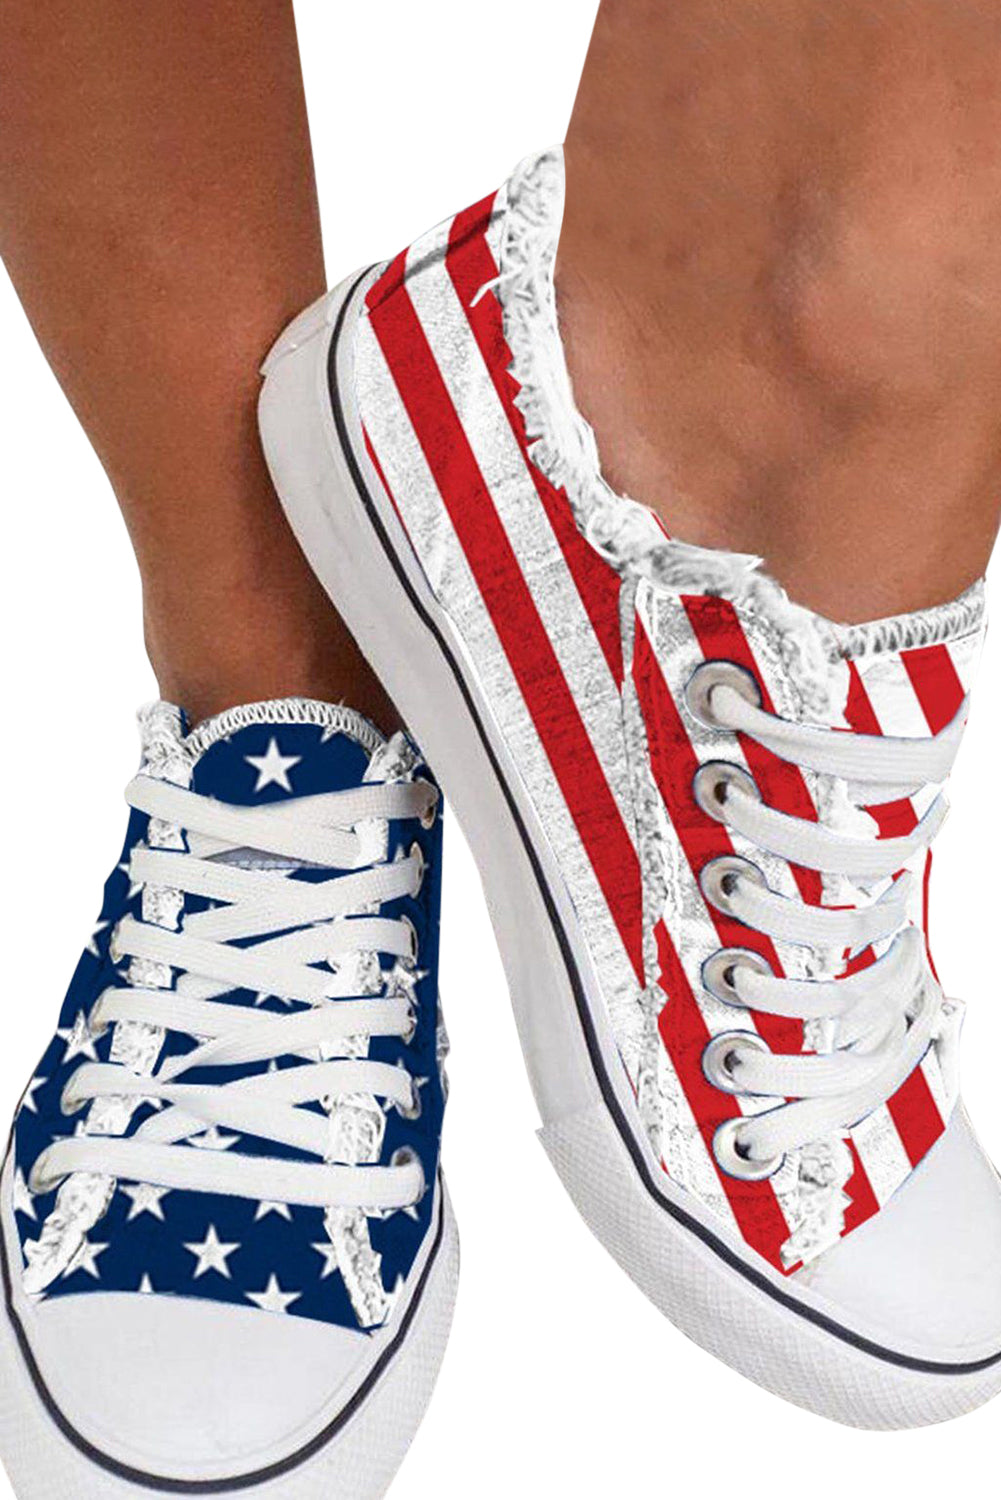 Blue American Flag Lace-up Canvas Flat Shoes